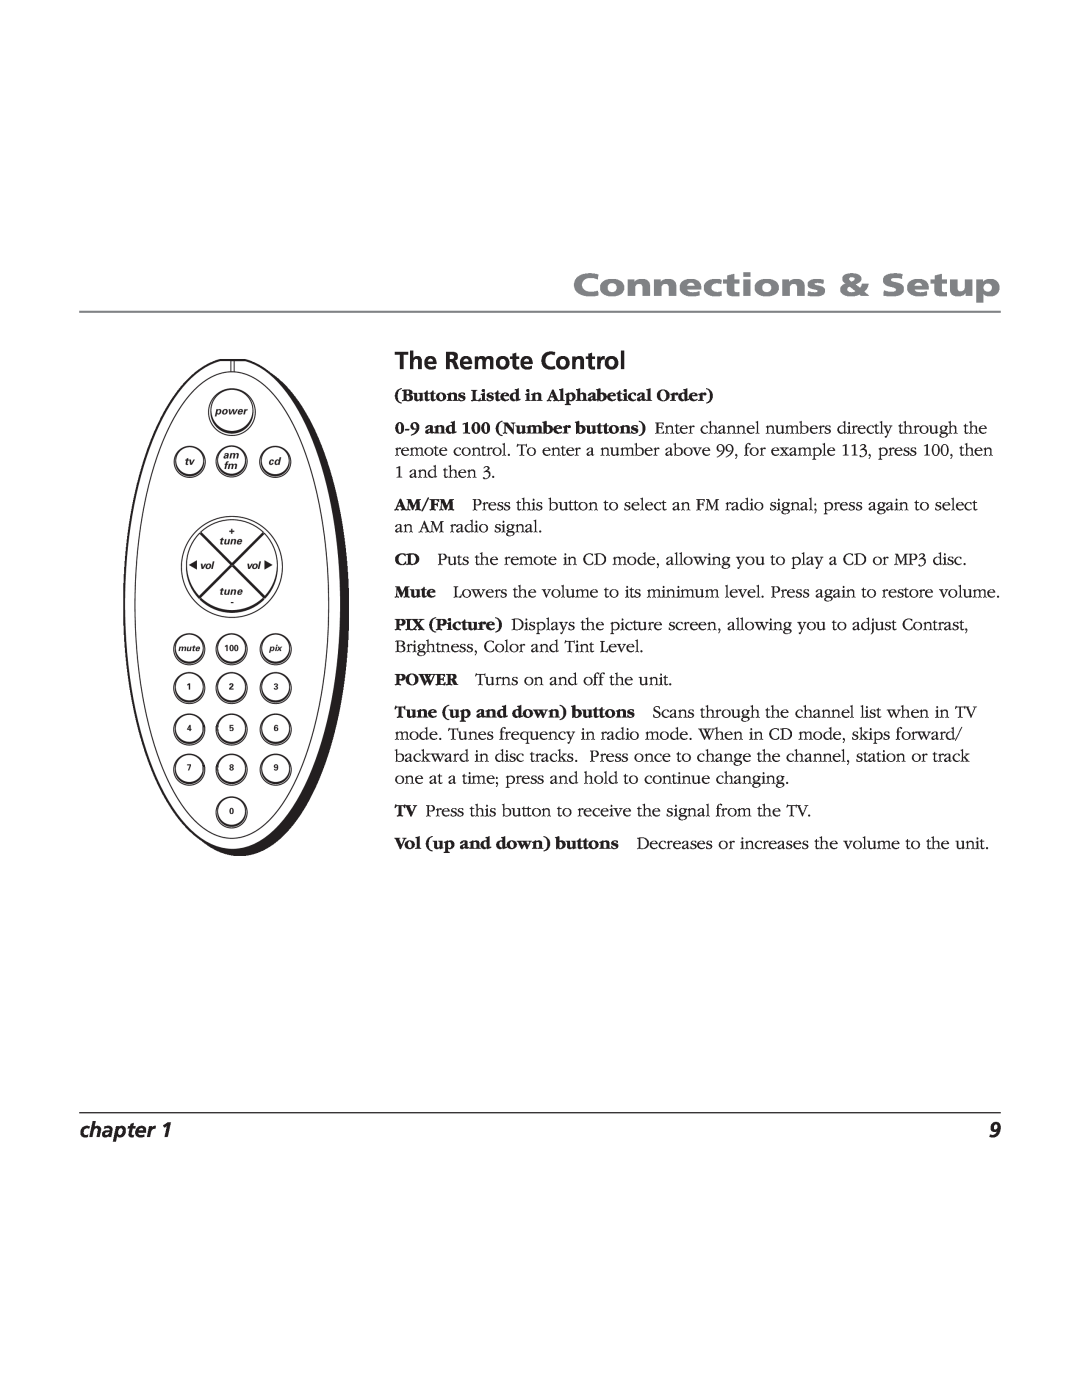 RCA TV/Radio/CD Player user manual The Remote Control, Connections & Setup, chapter 